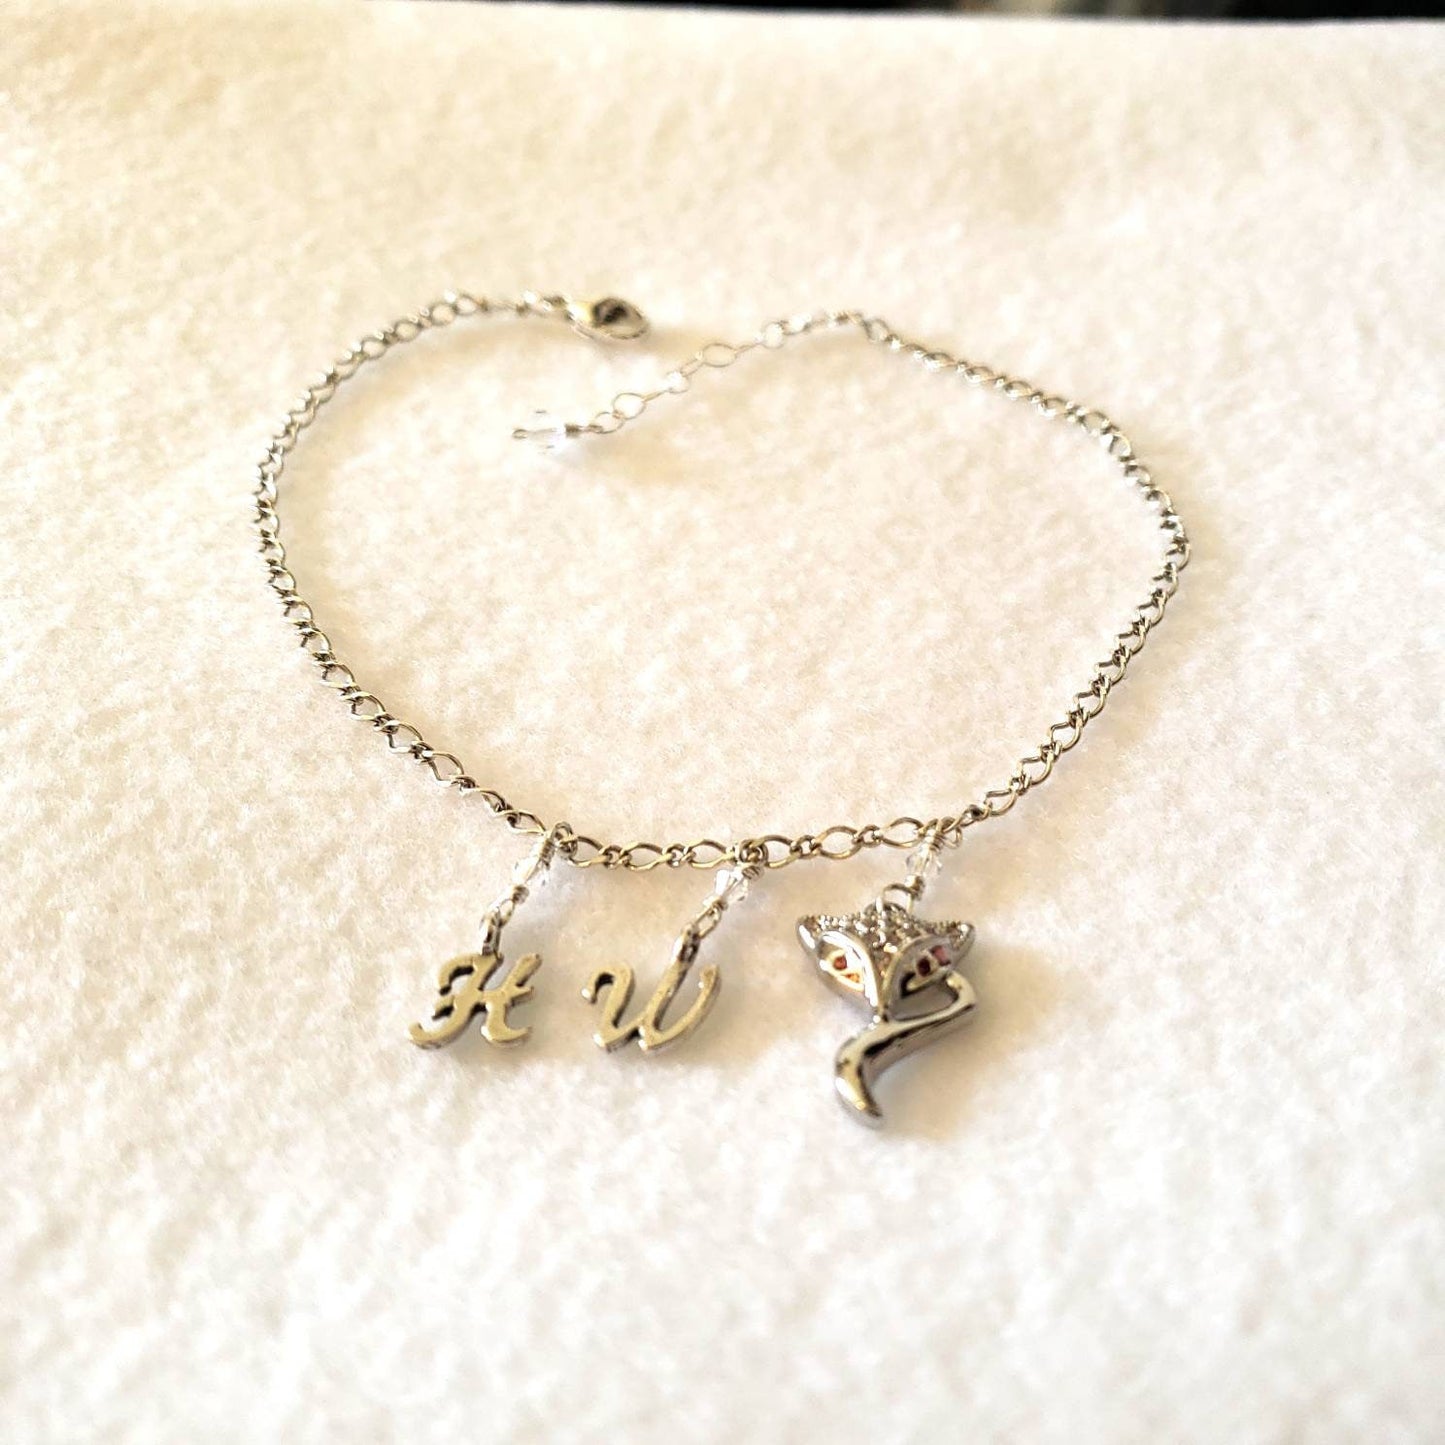 NEW - Hotwife Anklet 925 Sterling Silver Italian Chain, Sterling Silver Letters, Sterling Silver Vixen